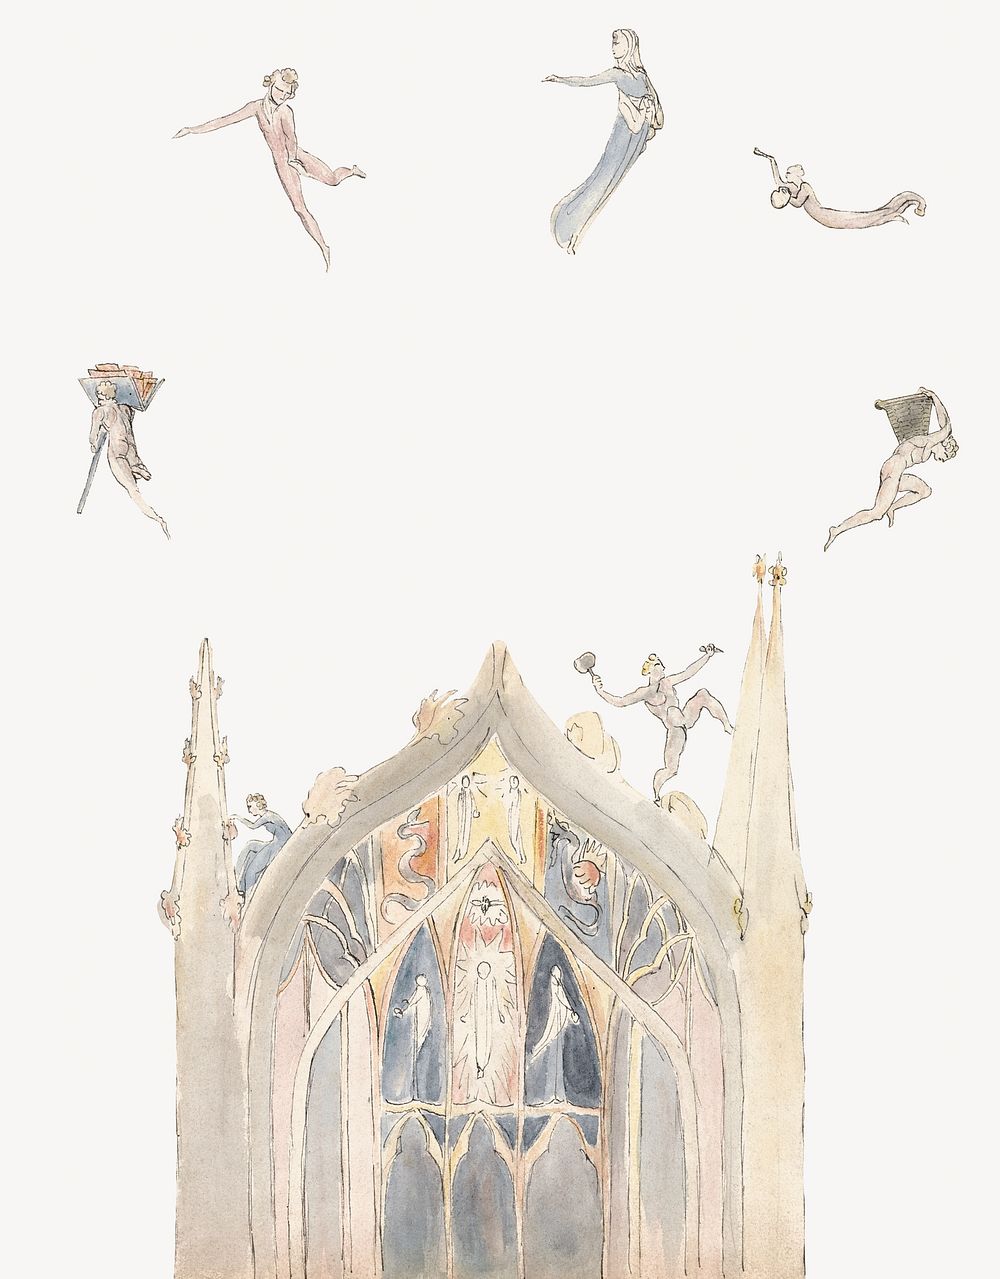 Christian church watercolor illustration element. Remixed from vintage artwork by rawpixel.